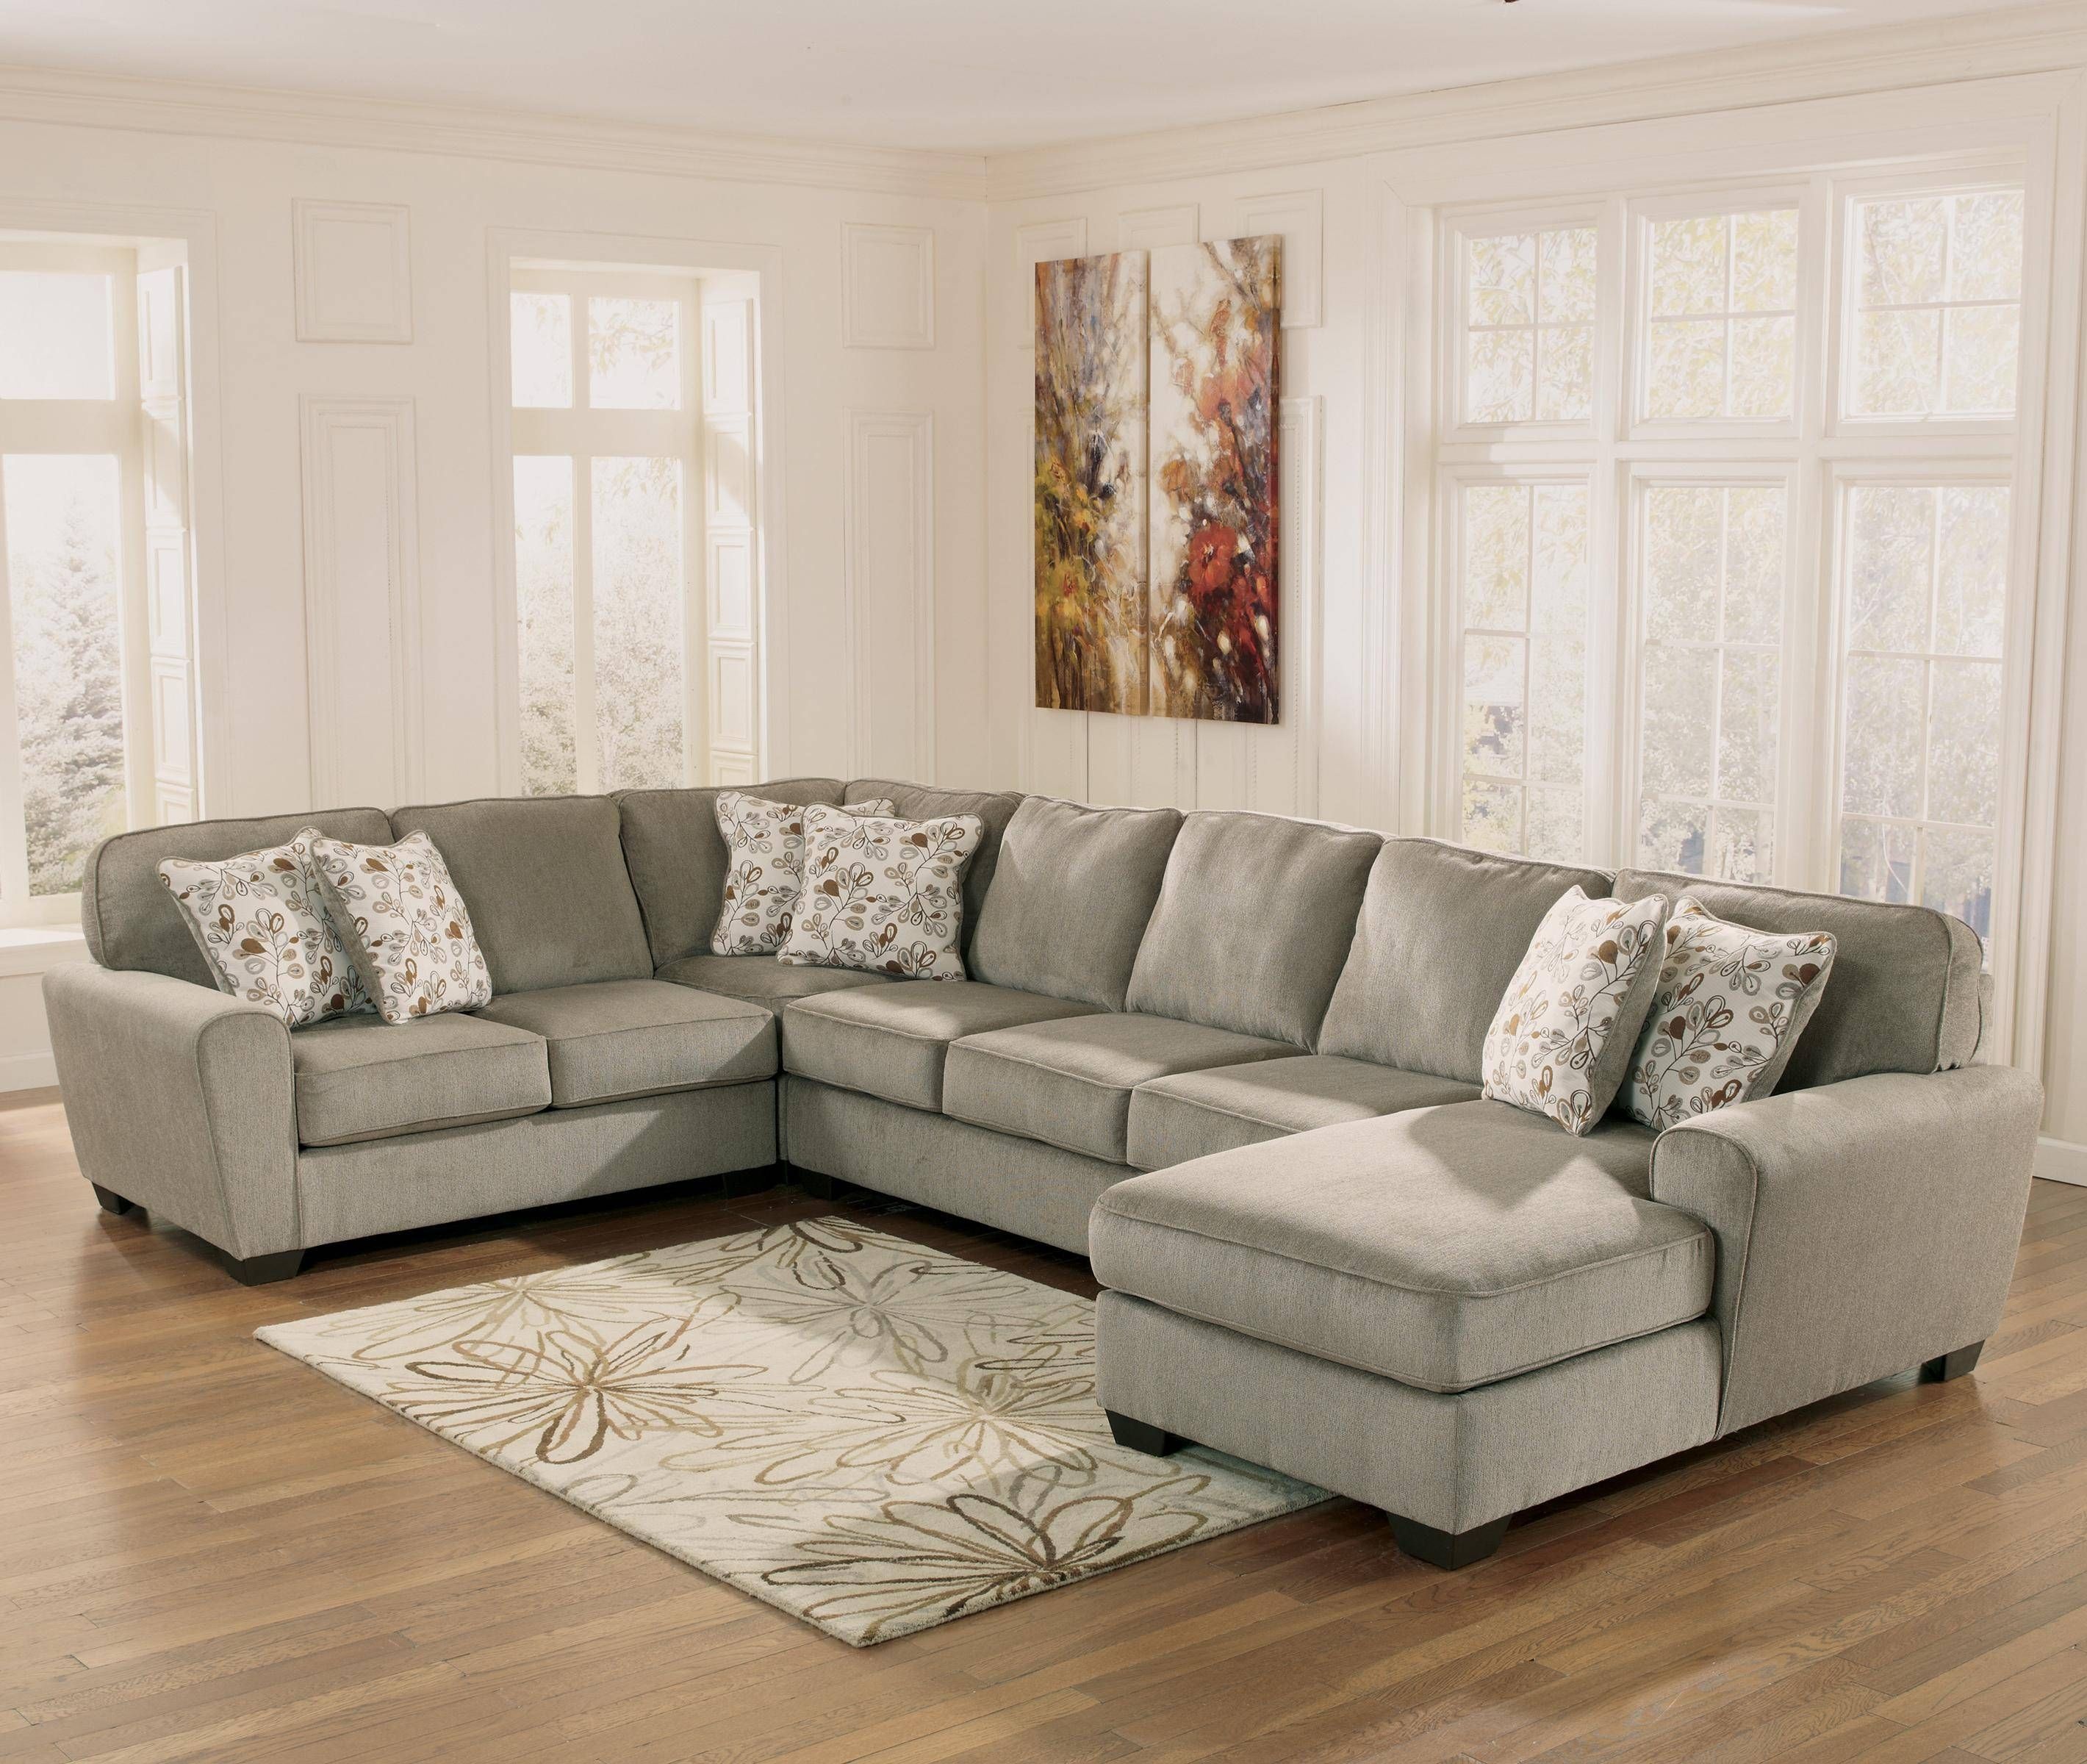 Ashley Furniture Patola Park – Patina 4 Piece Sectional With Right Intended For Ashley Furniture Corduroy Sectional Sofas (View 5 of 15)